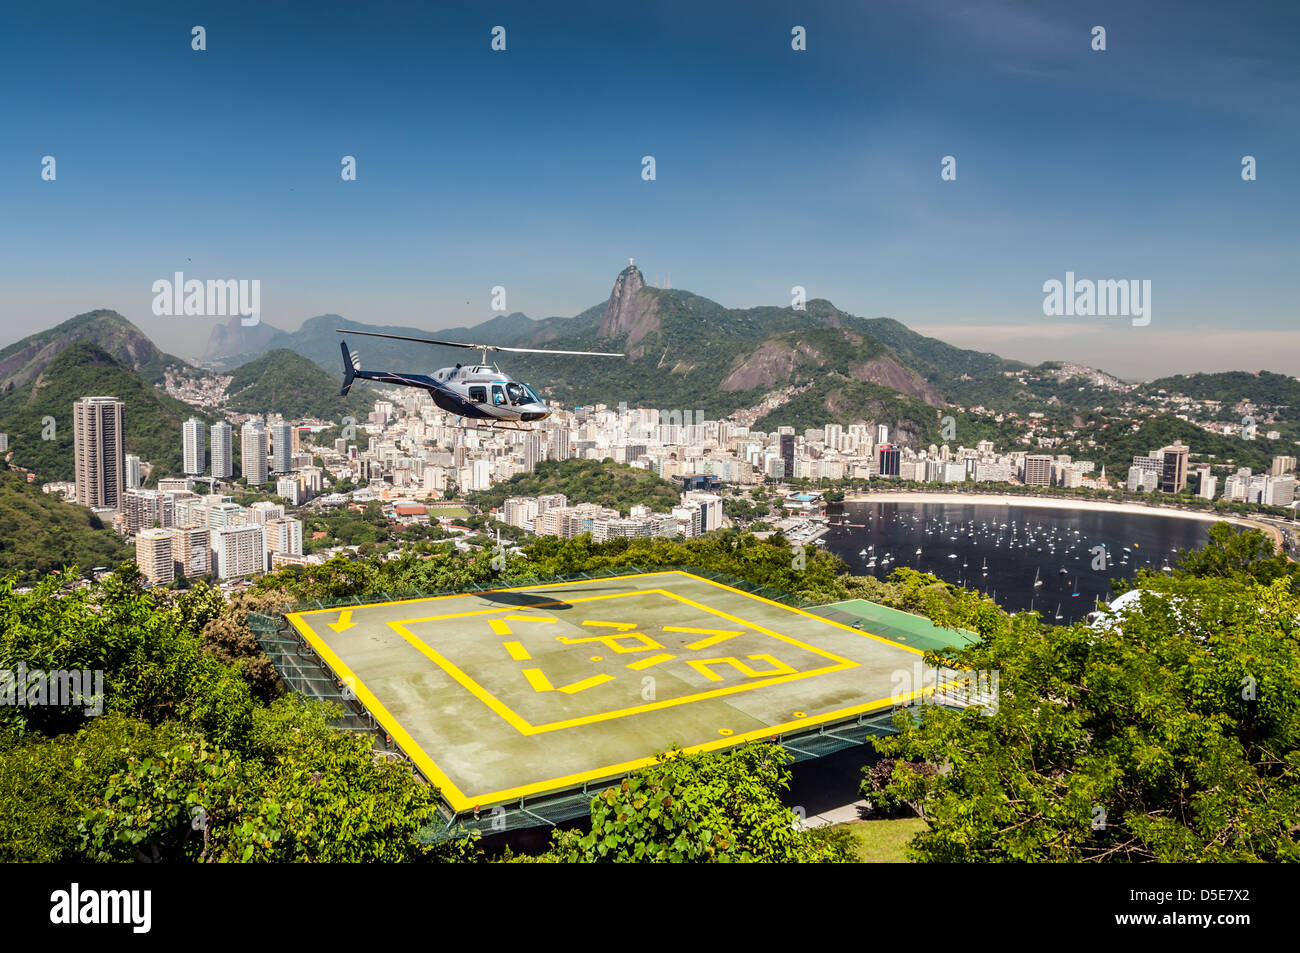 View of Heliport and Botafogo bay - Rio de Janeiro. Helipad in the foreground. Stock Photo